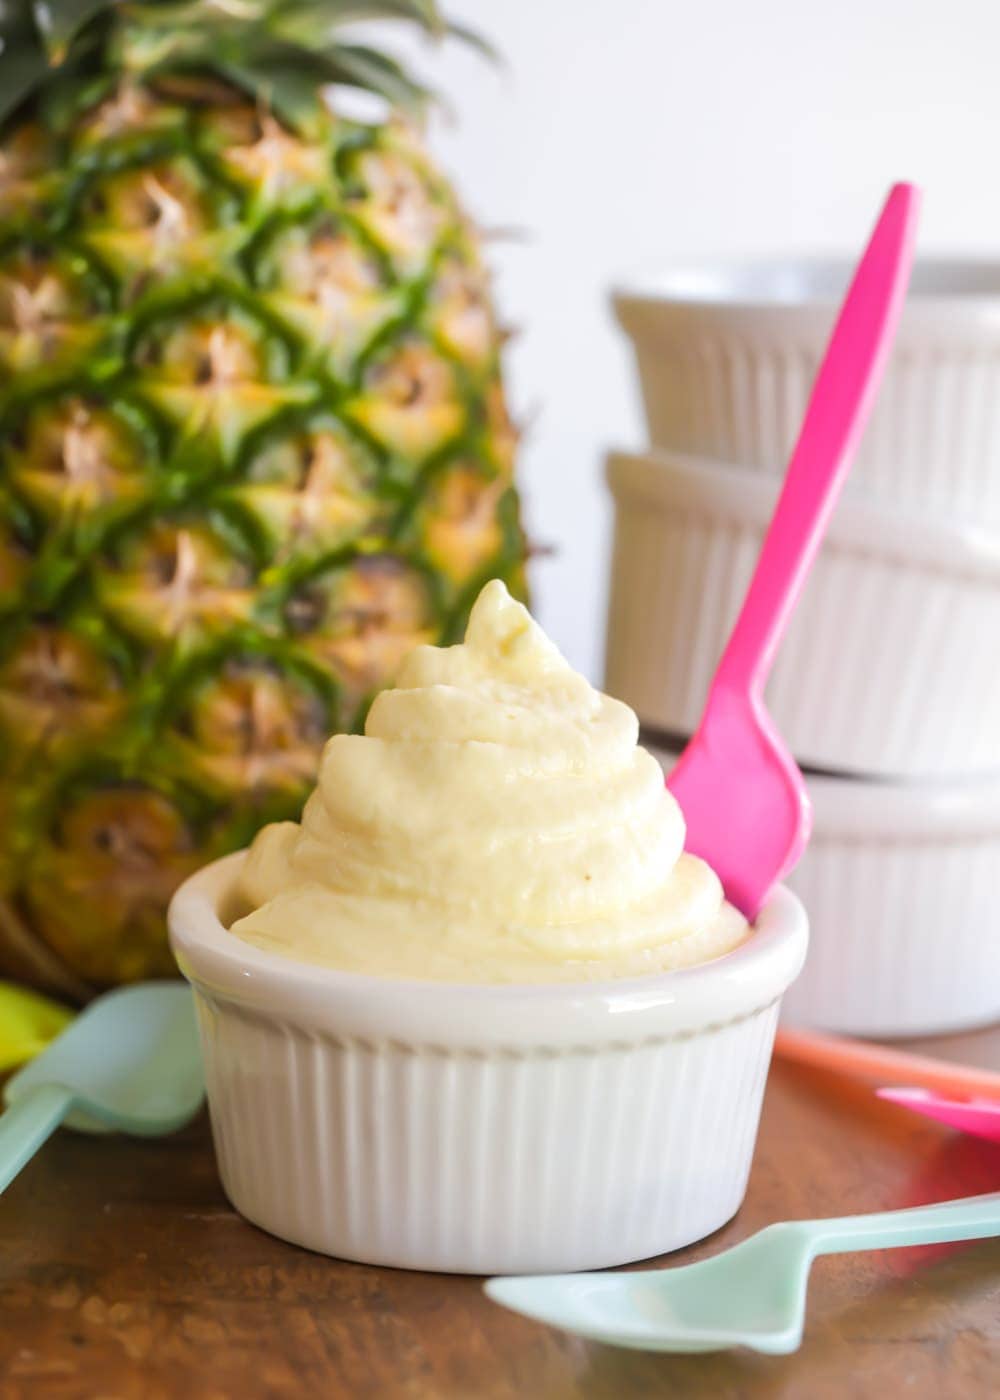 Fresh dole whip served in a white bowl with a pink spoon.